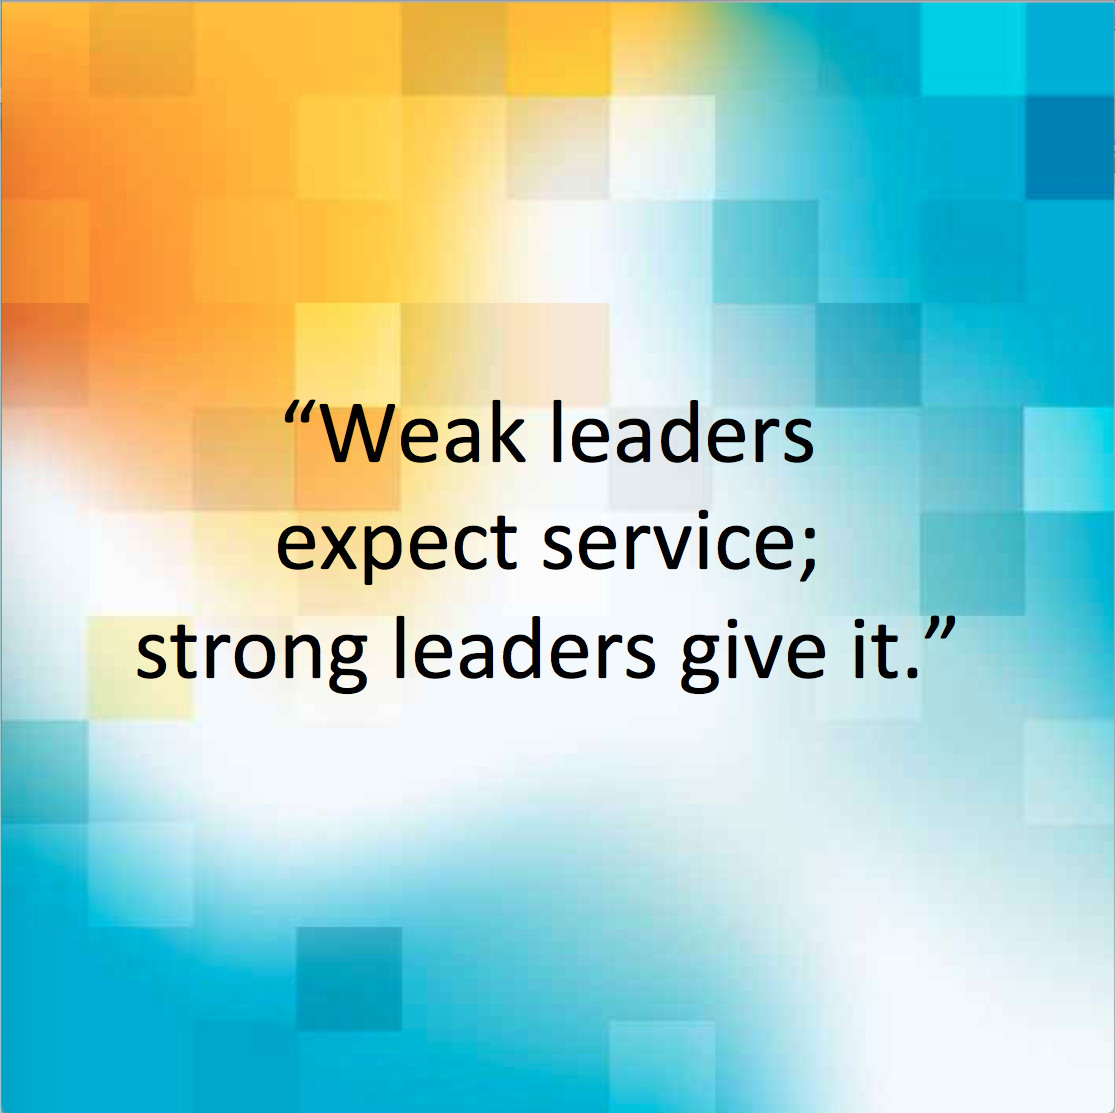 Quotes About Service And Leadership
 Keep on the Right Path through a Servant Leadership Focus